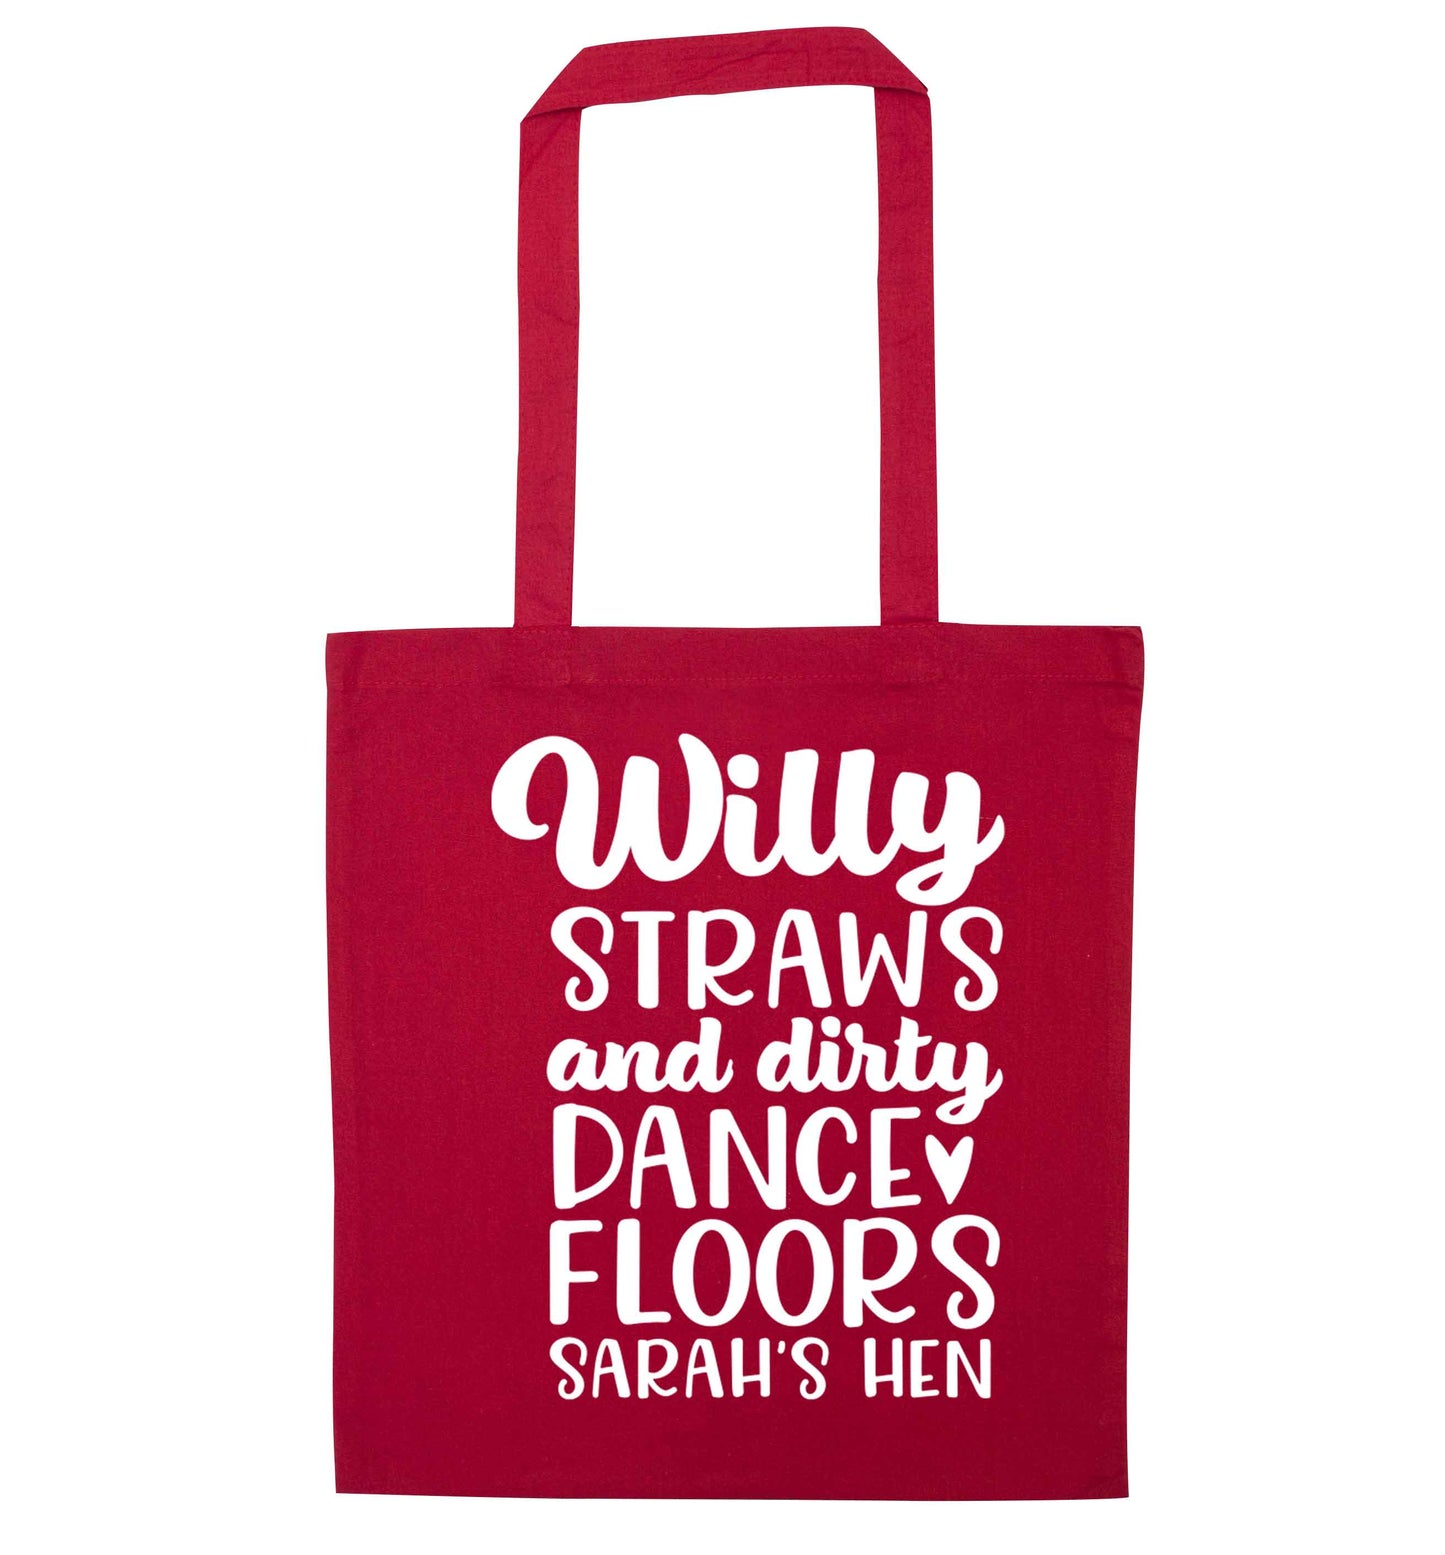 Willy straws and dirty dance floors red tote bag